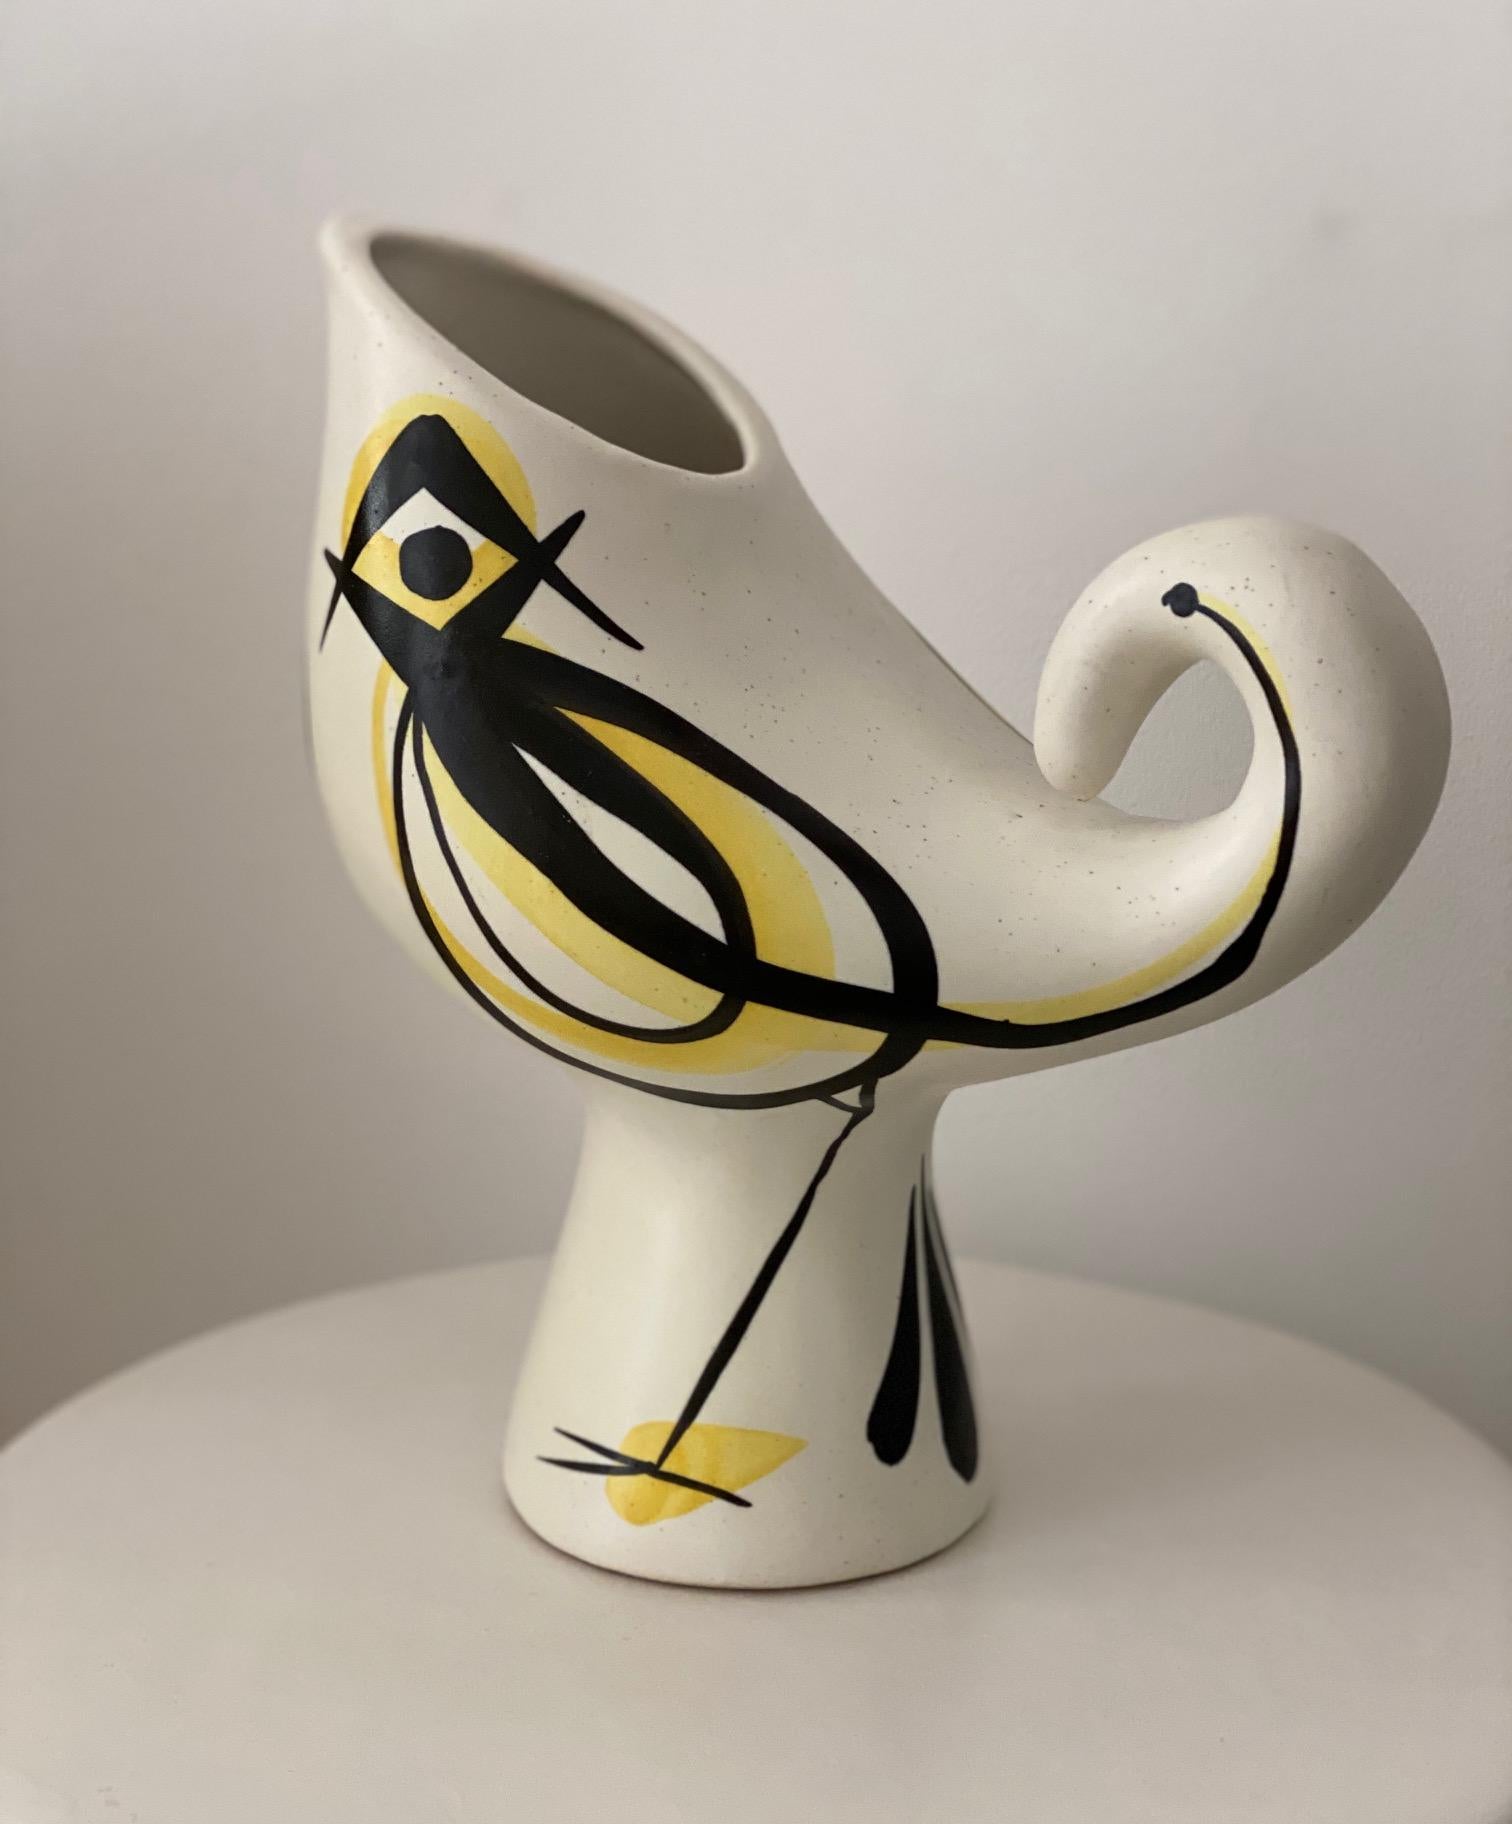 Mid-20th Century Ceramic Bird Pitcher Vase Signed by Roger Capron, Vallauris, 1950s